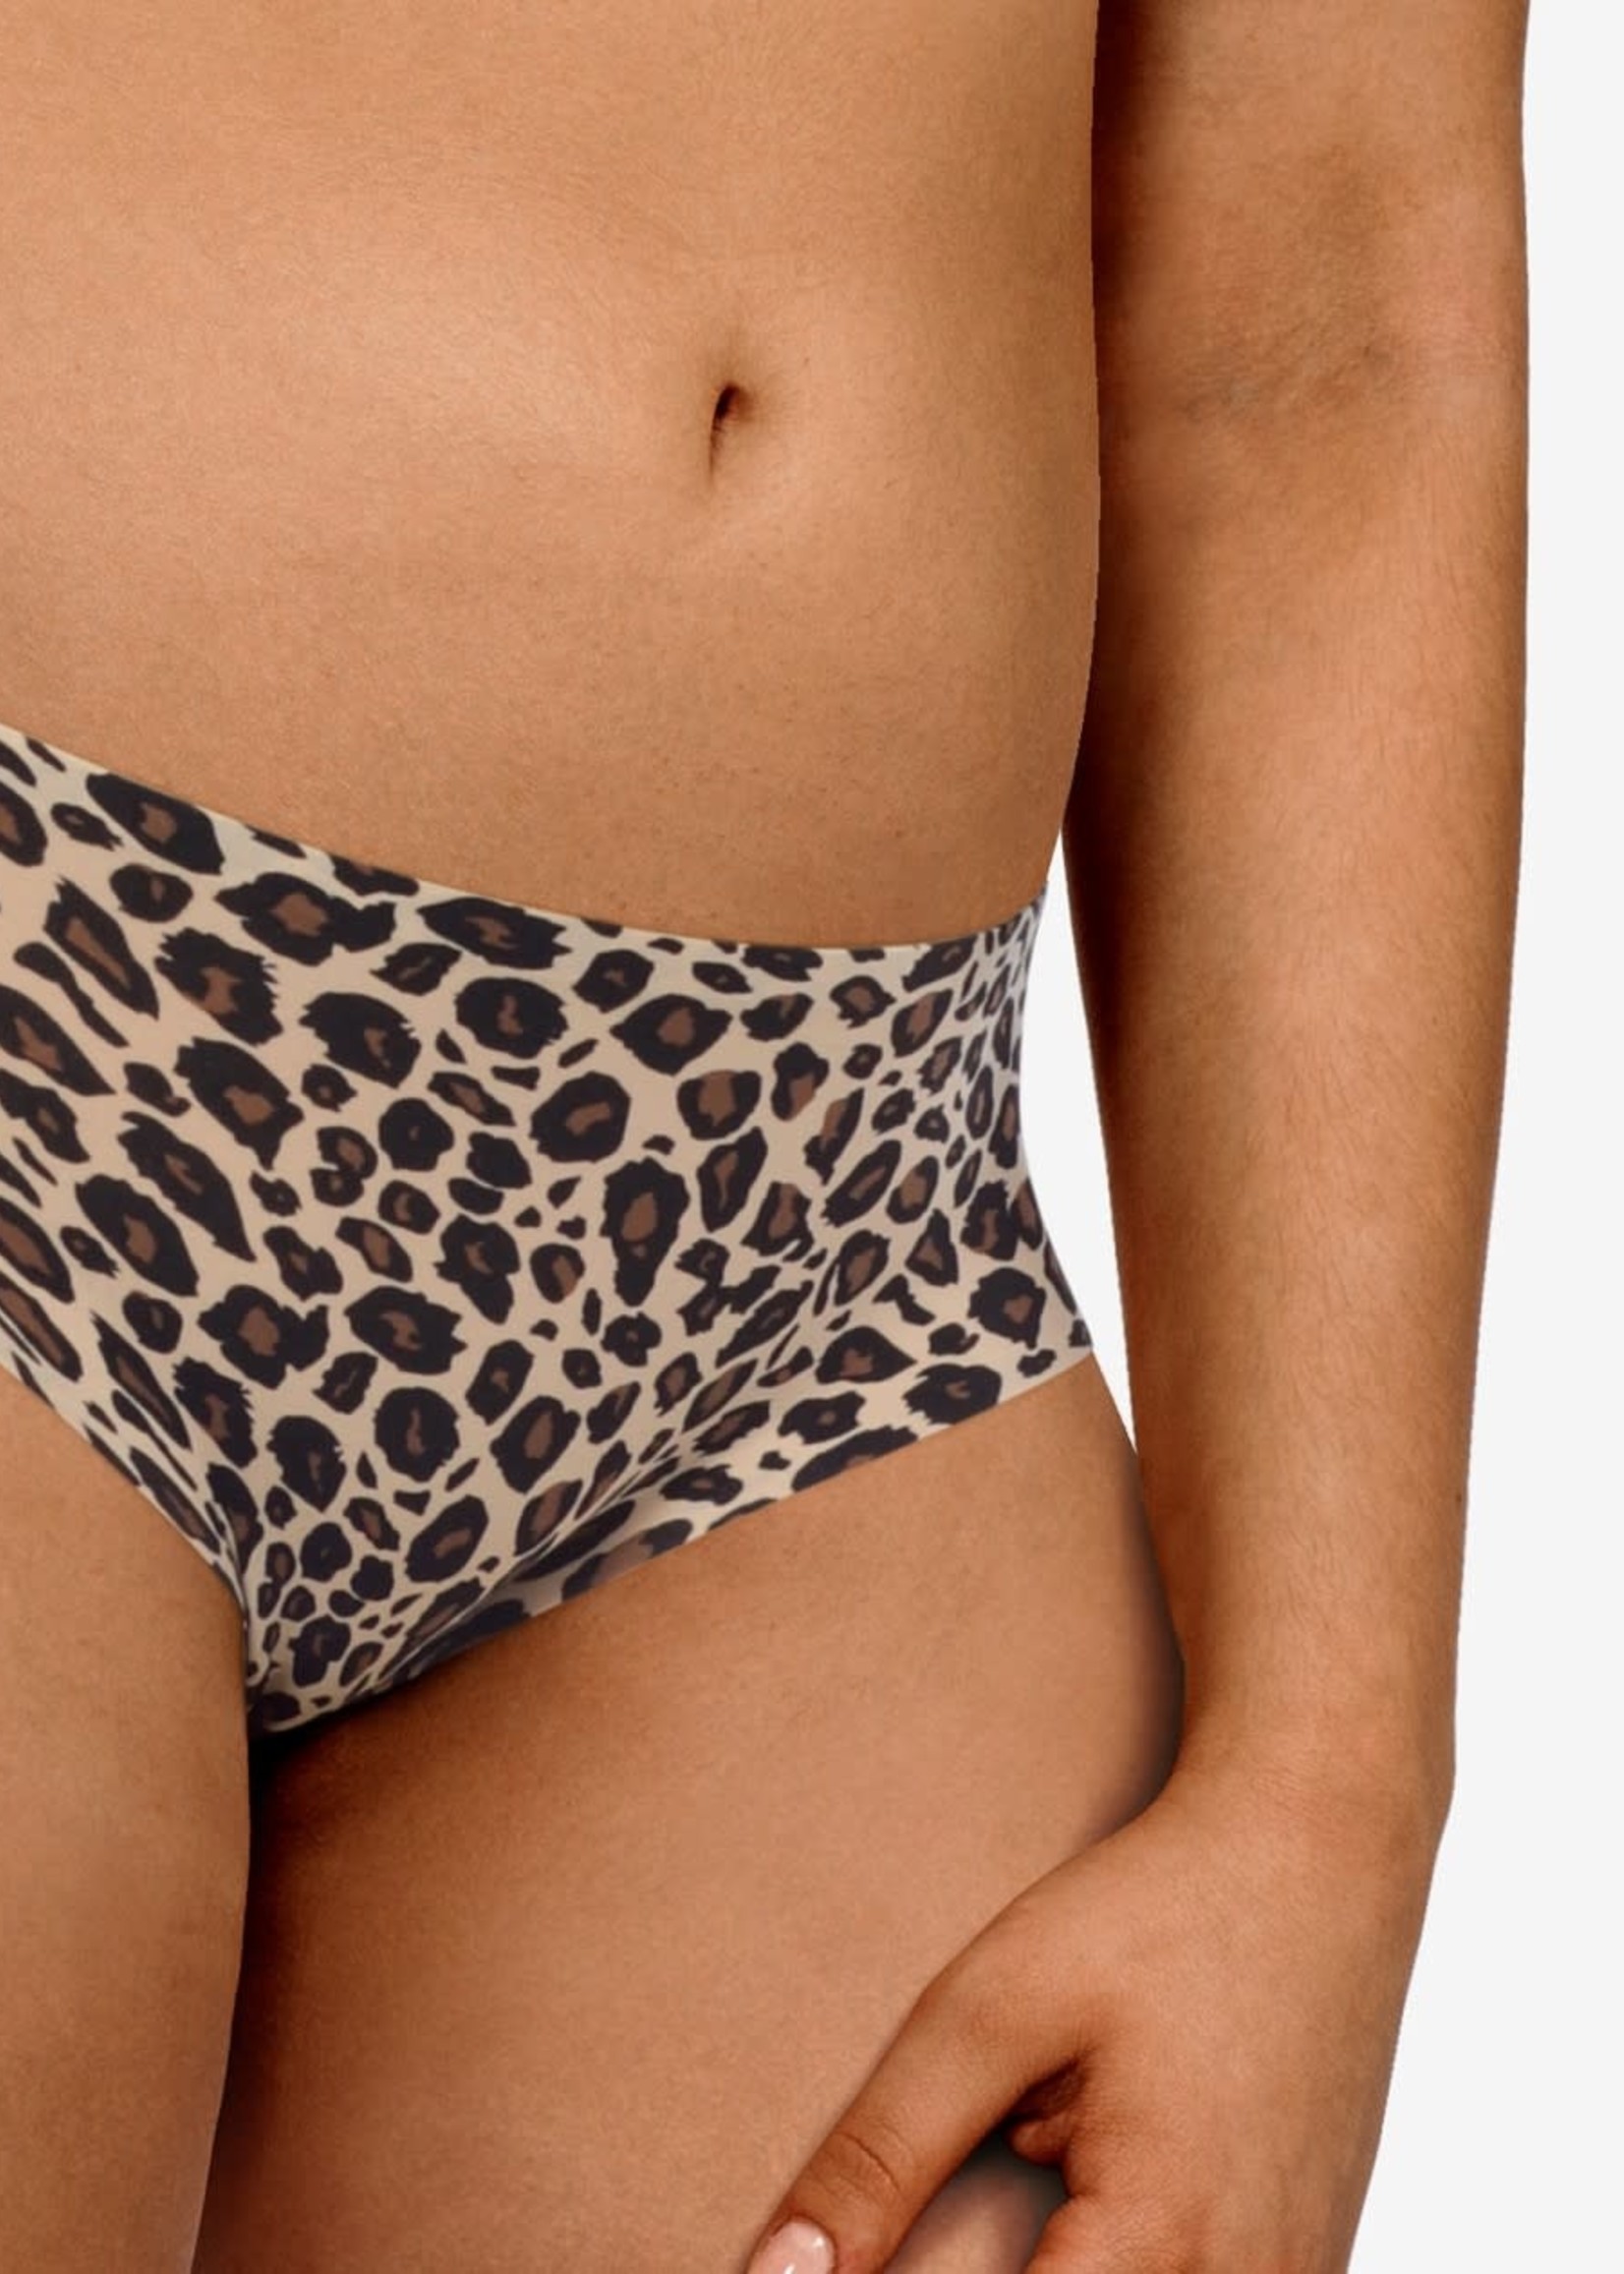 Chantelle SoftStretch Hipster - Leopard